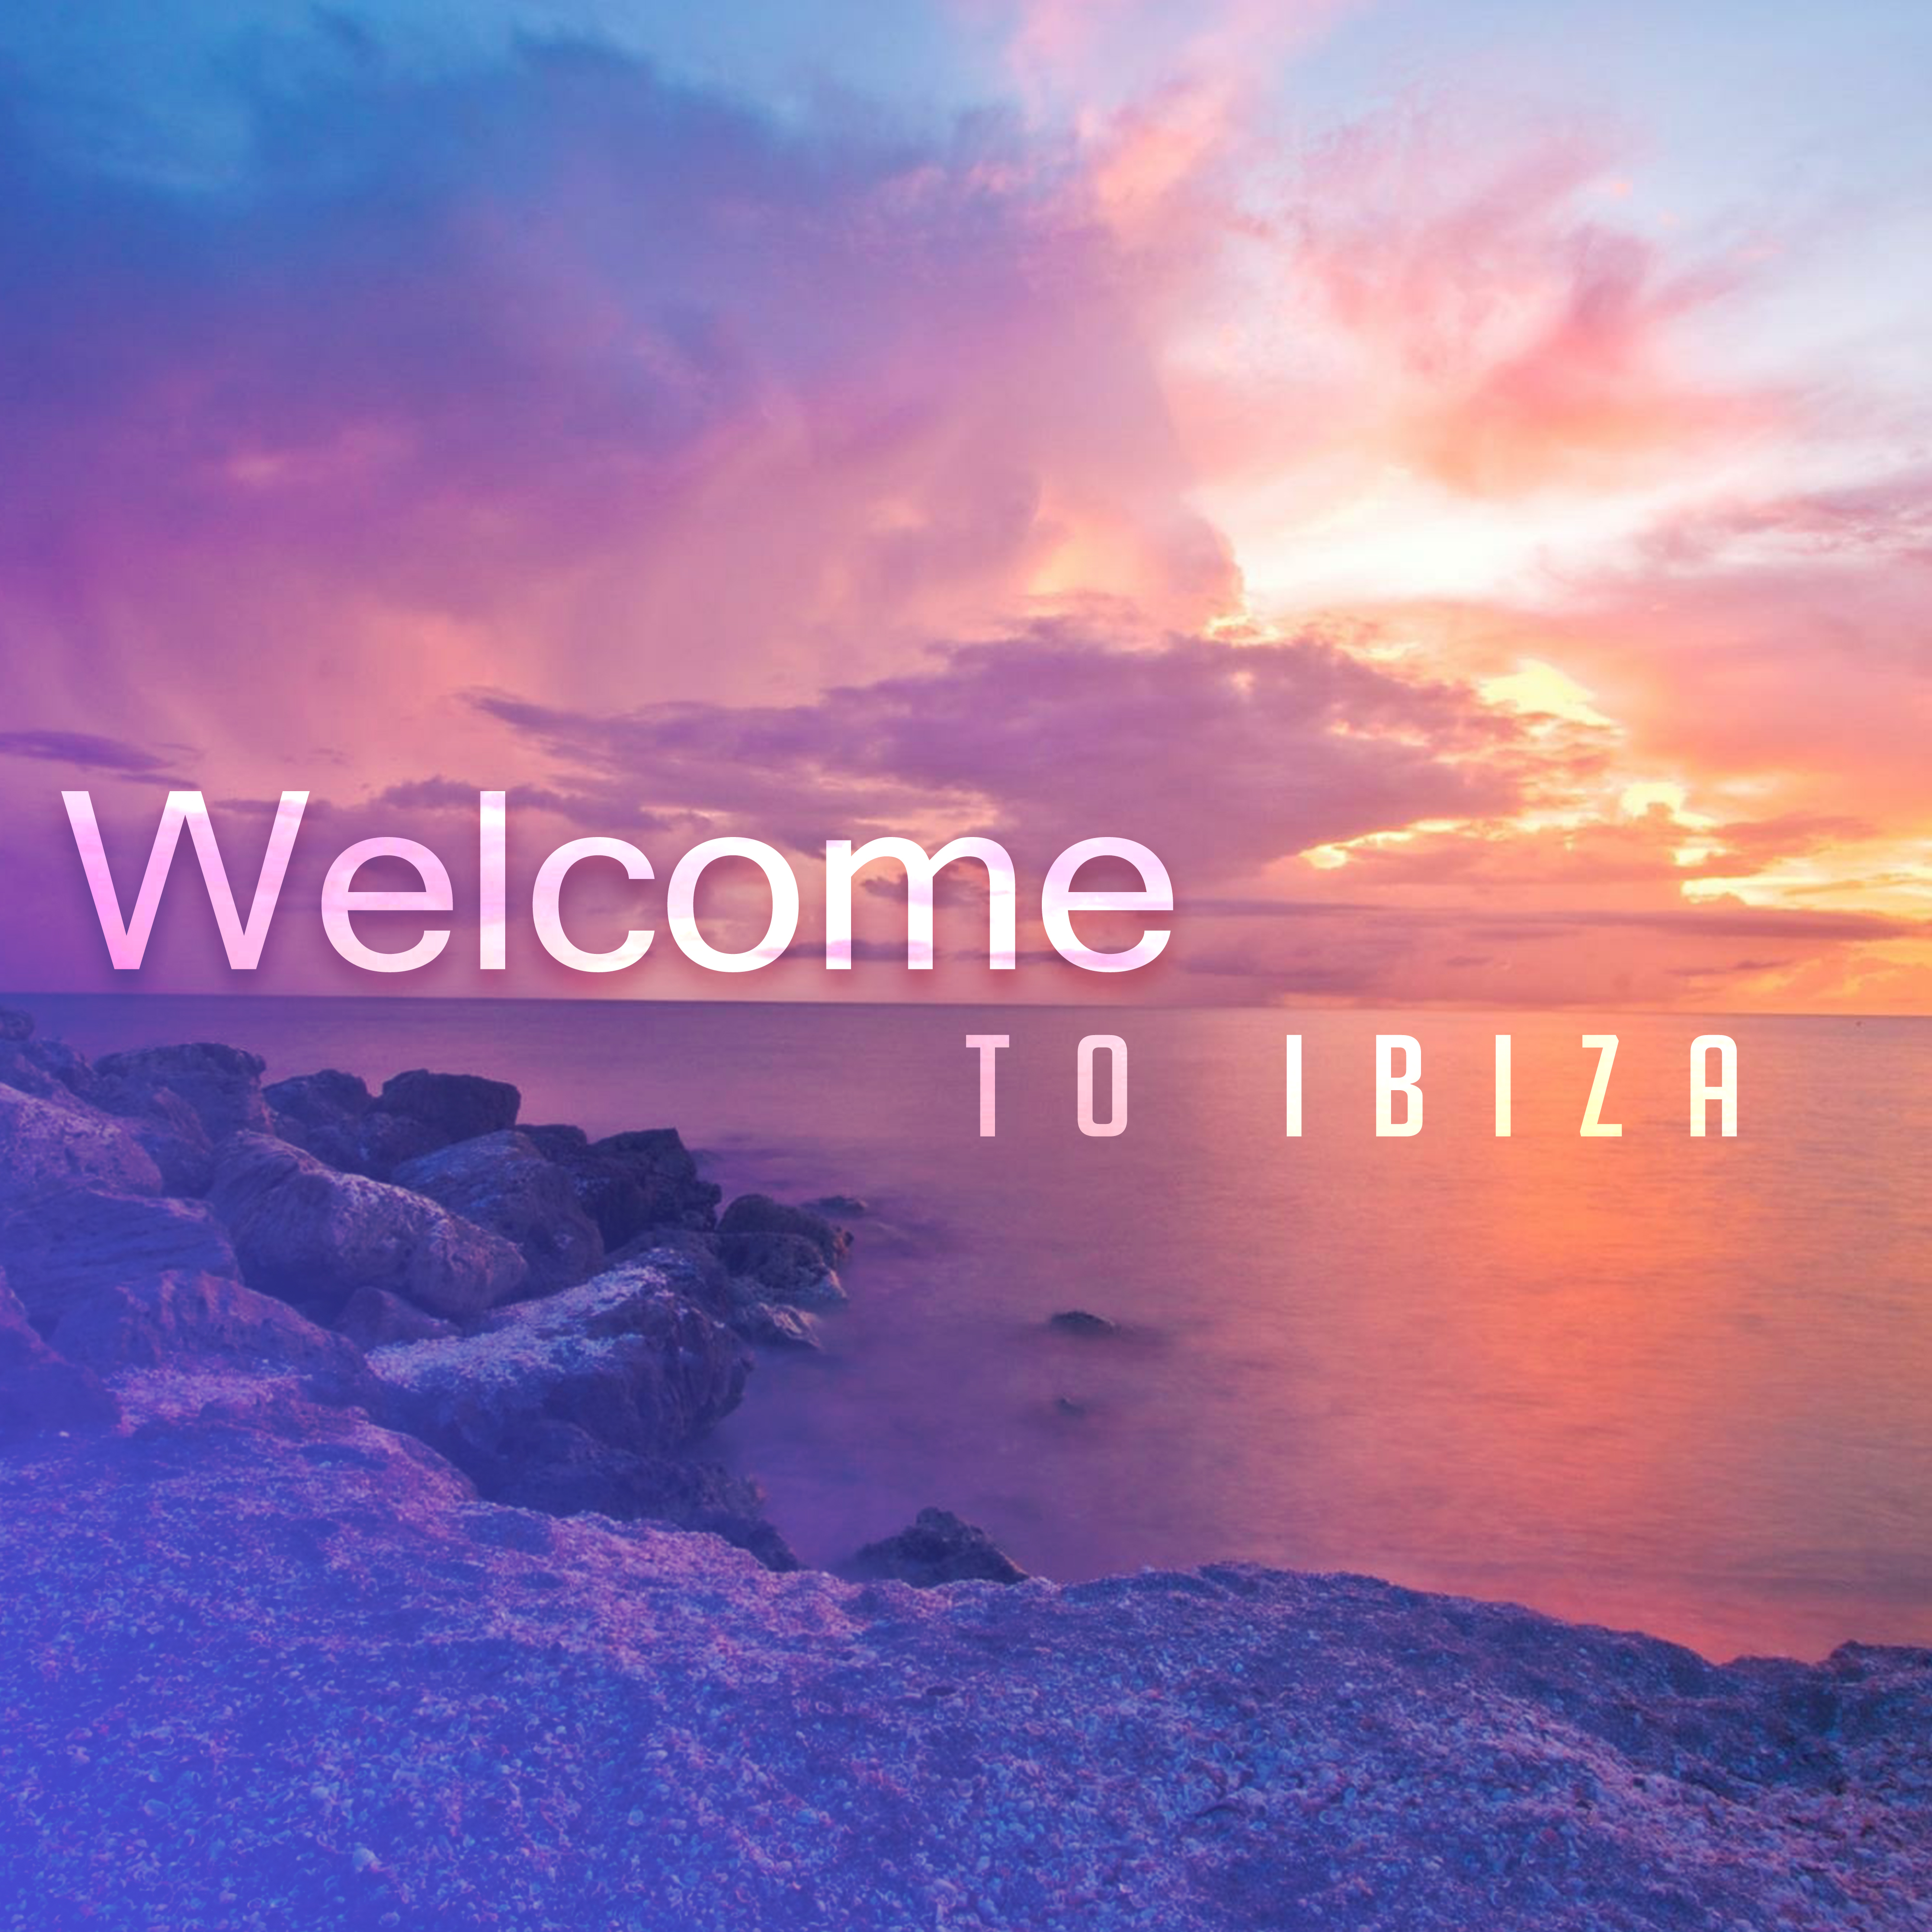 Welcome to Ibiza – Chill Out 2017, Summer Beats, Paradise Beach, Ibiza Lounge Club, Relaxation